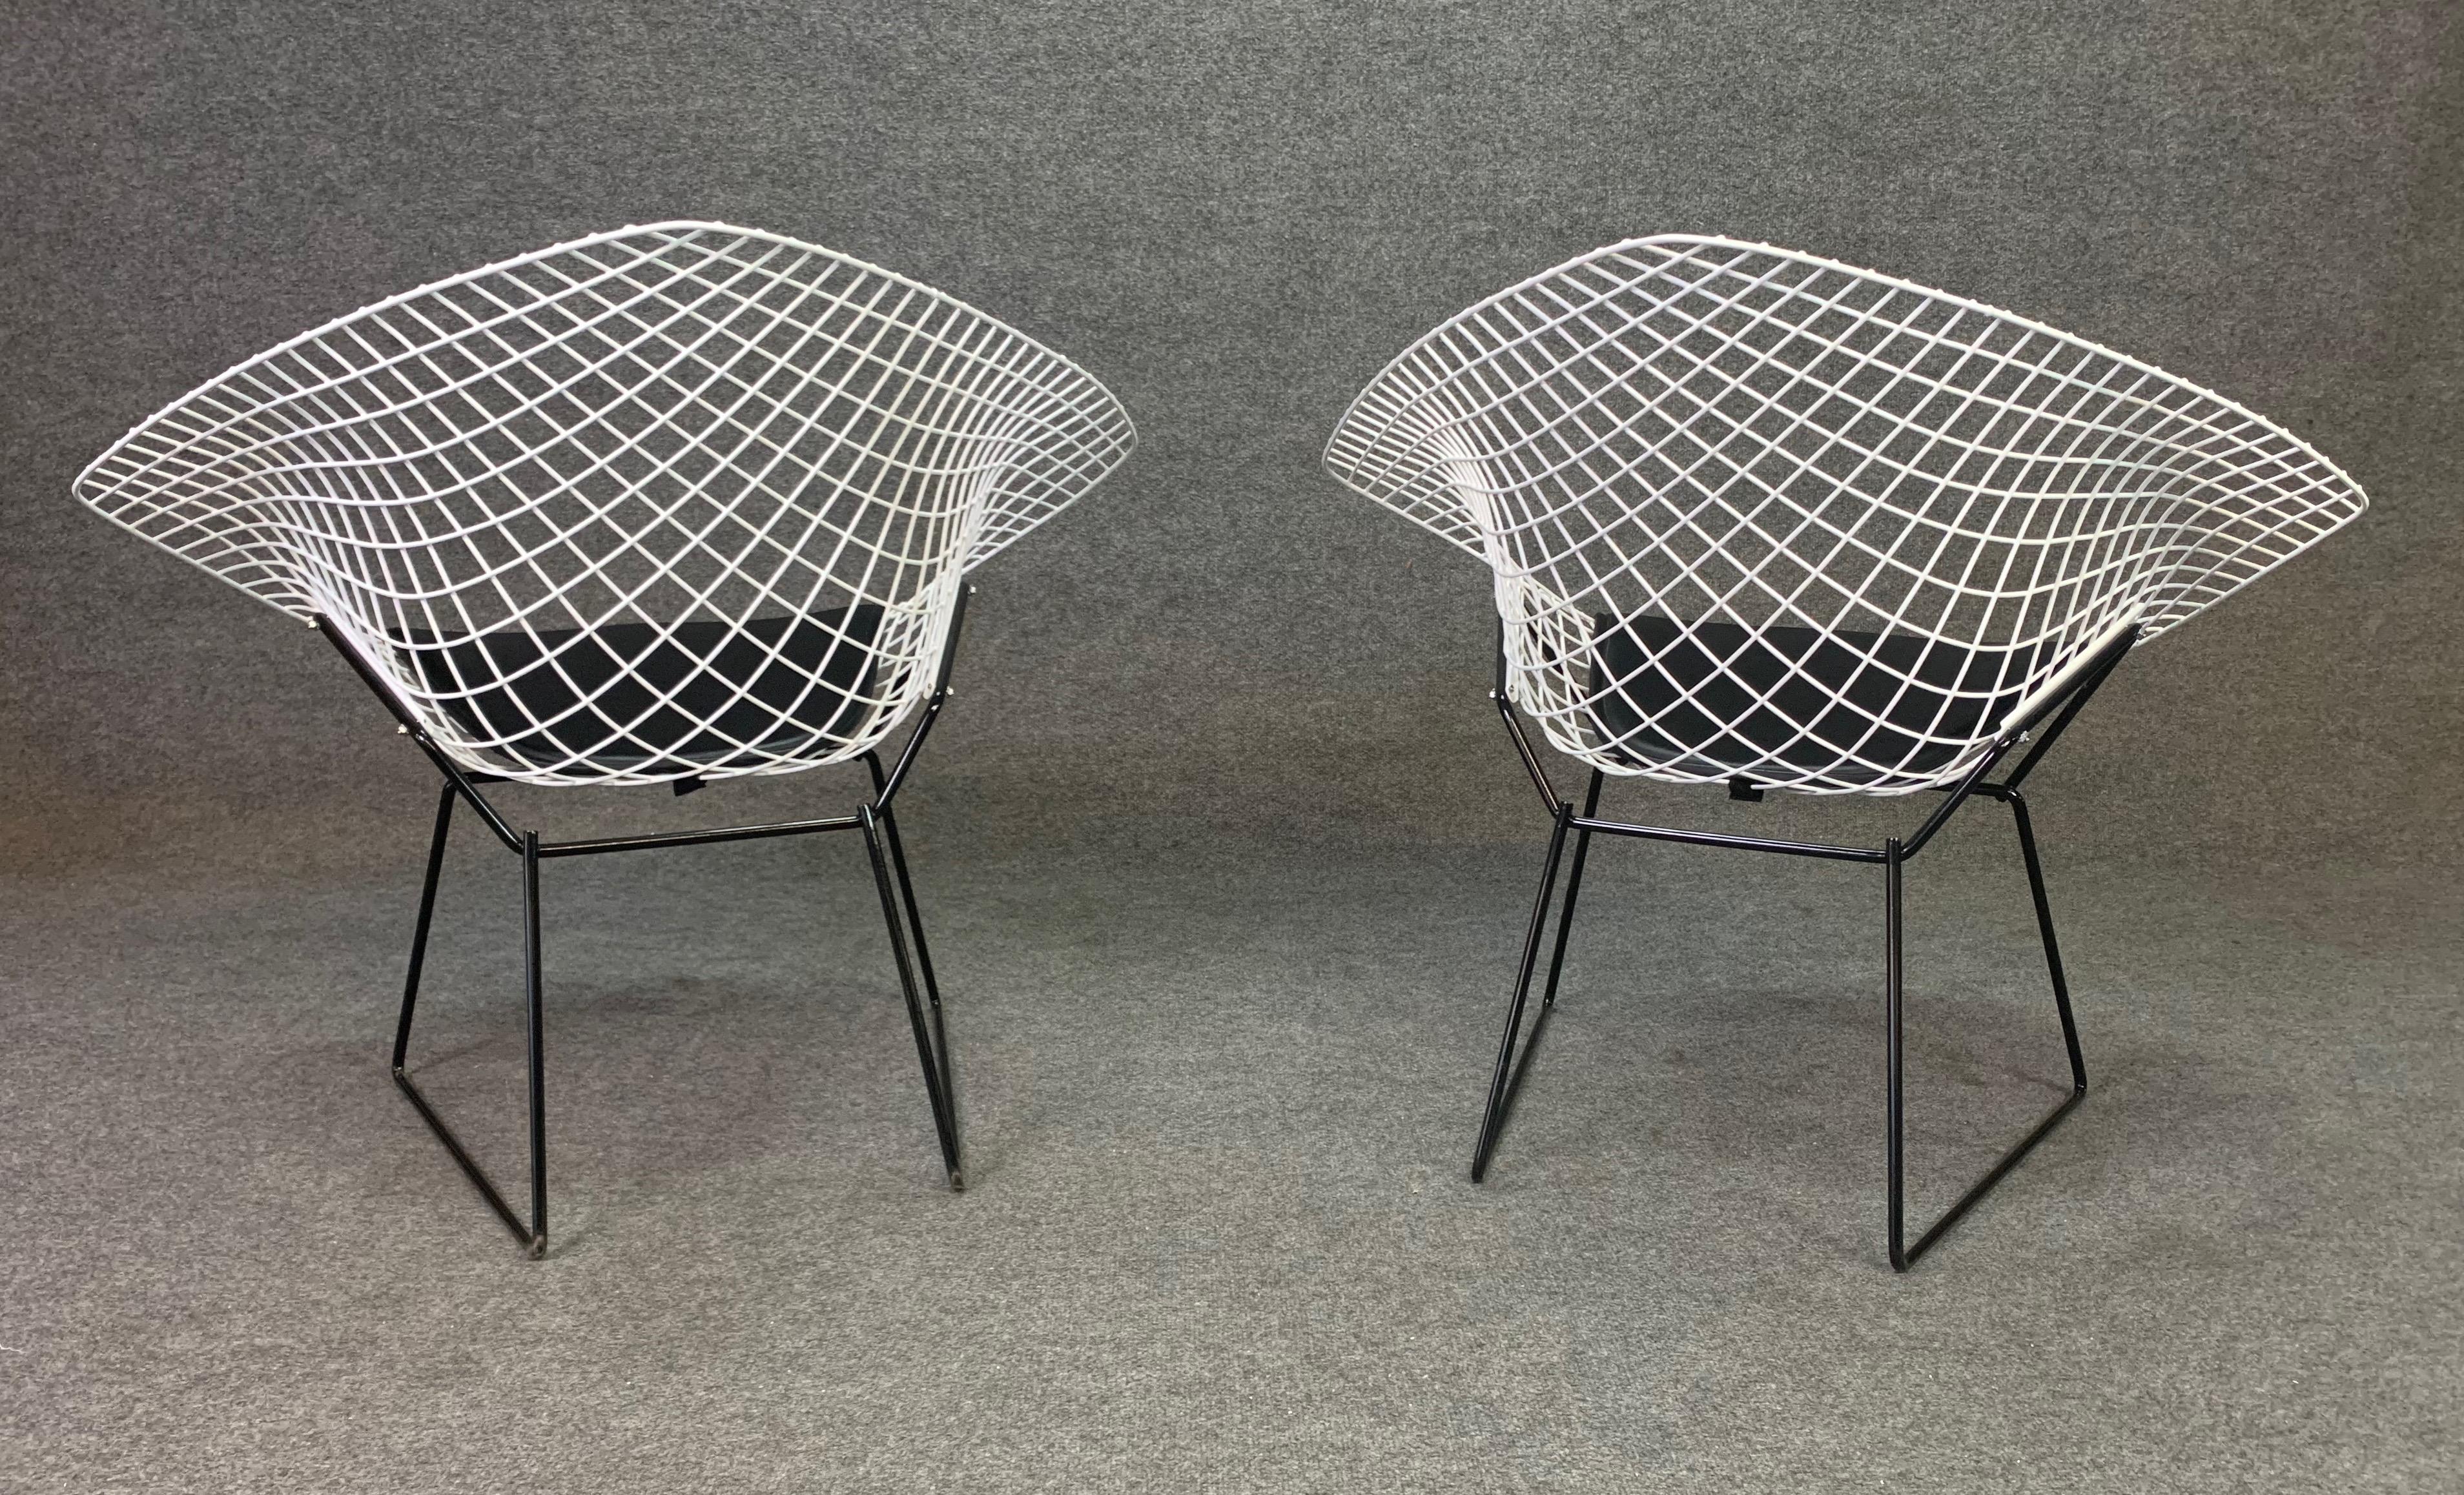 Pair of Vintage Mid-Century Modern Diamond Chairs by Harry Bertoia for Knoll 1